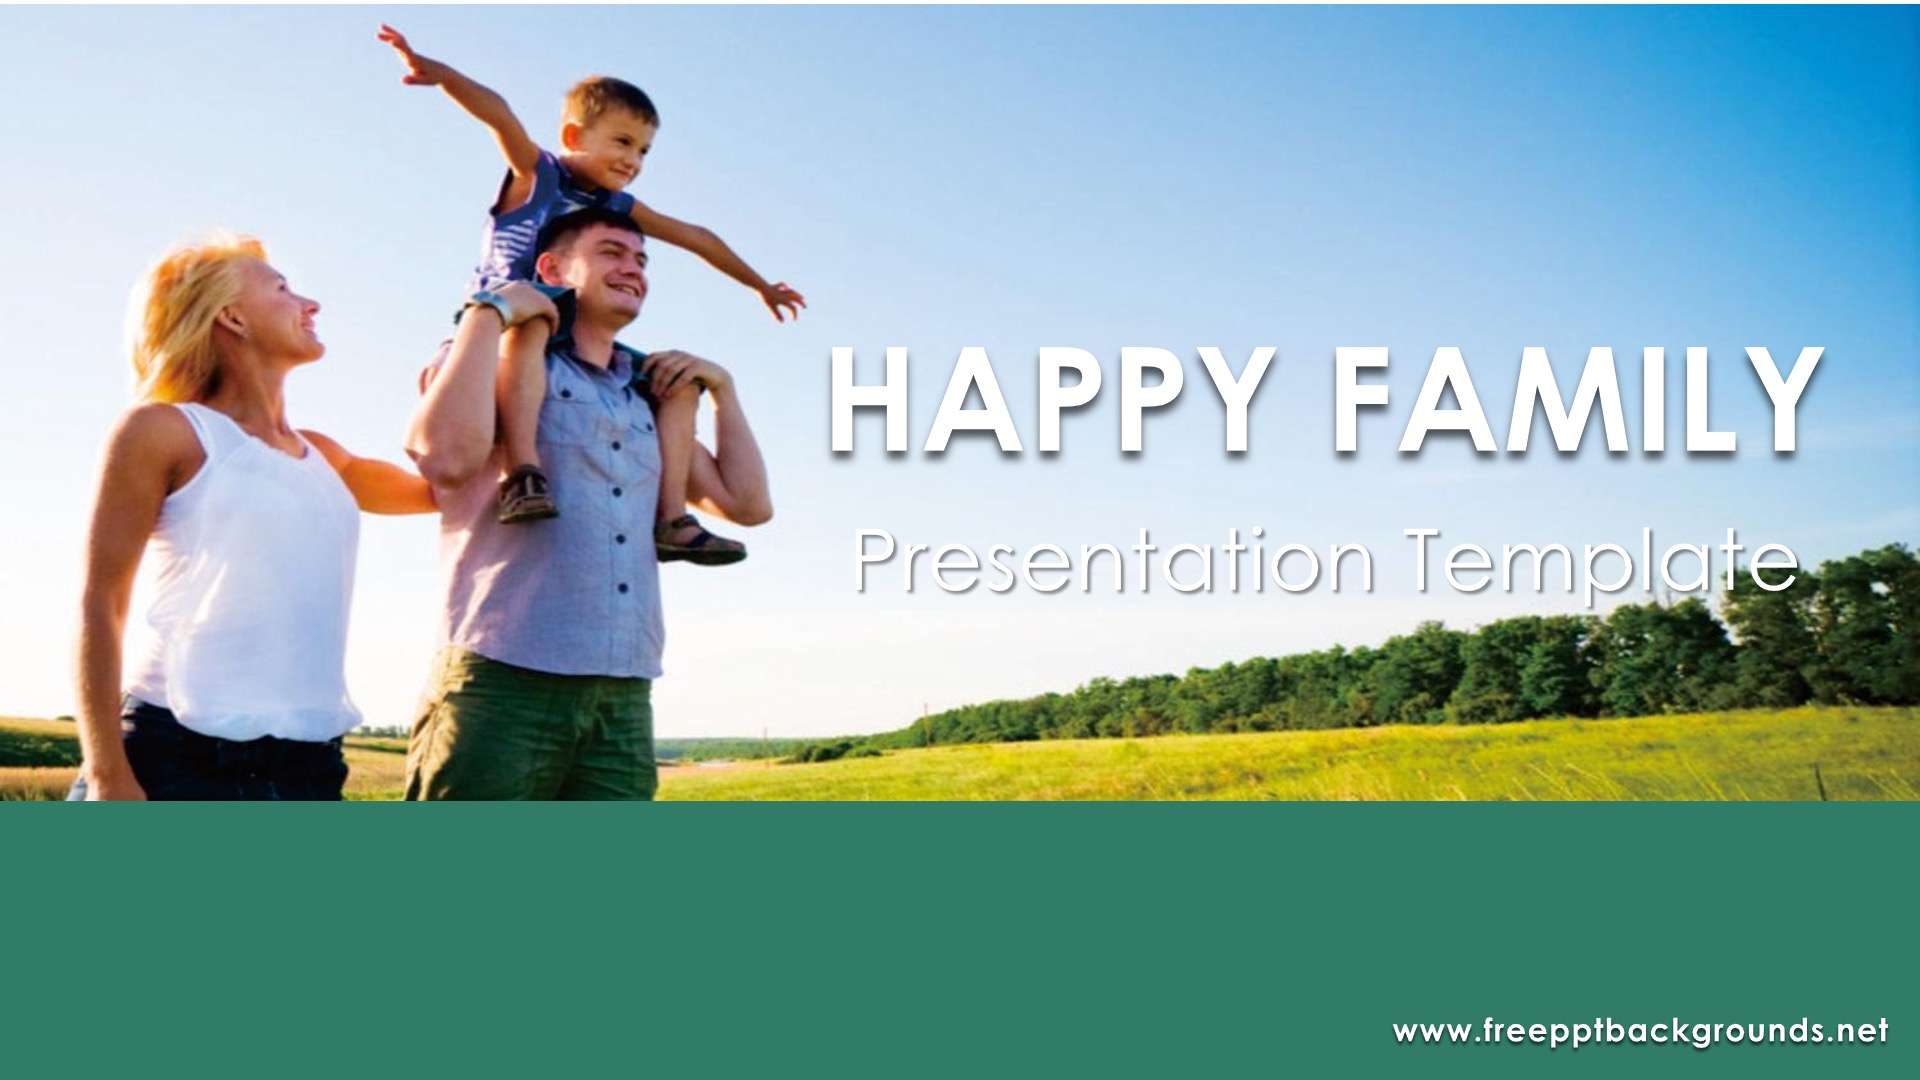 presentation about family day